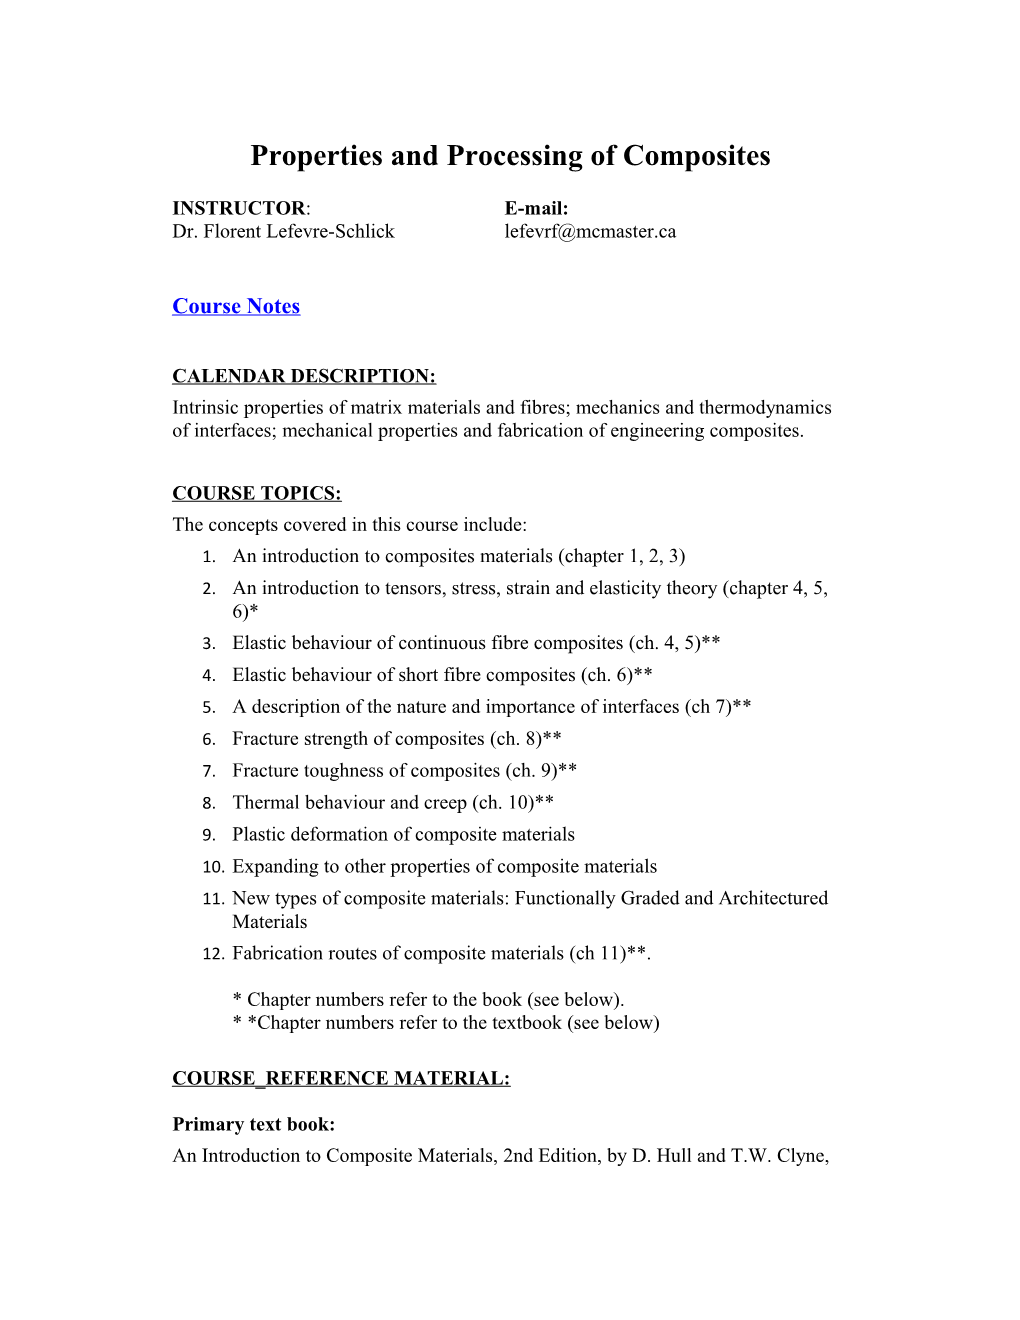 An Introduction to Composites Materials (Chapter 1, 2, 3)